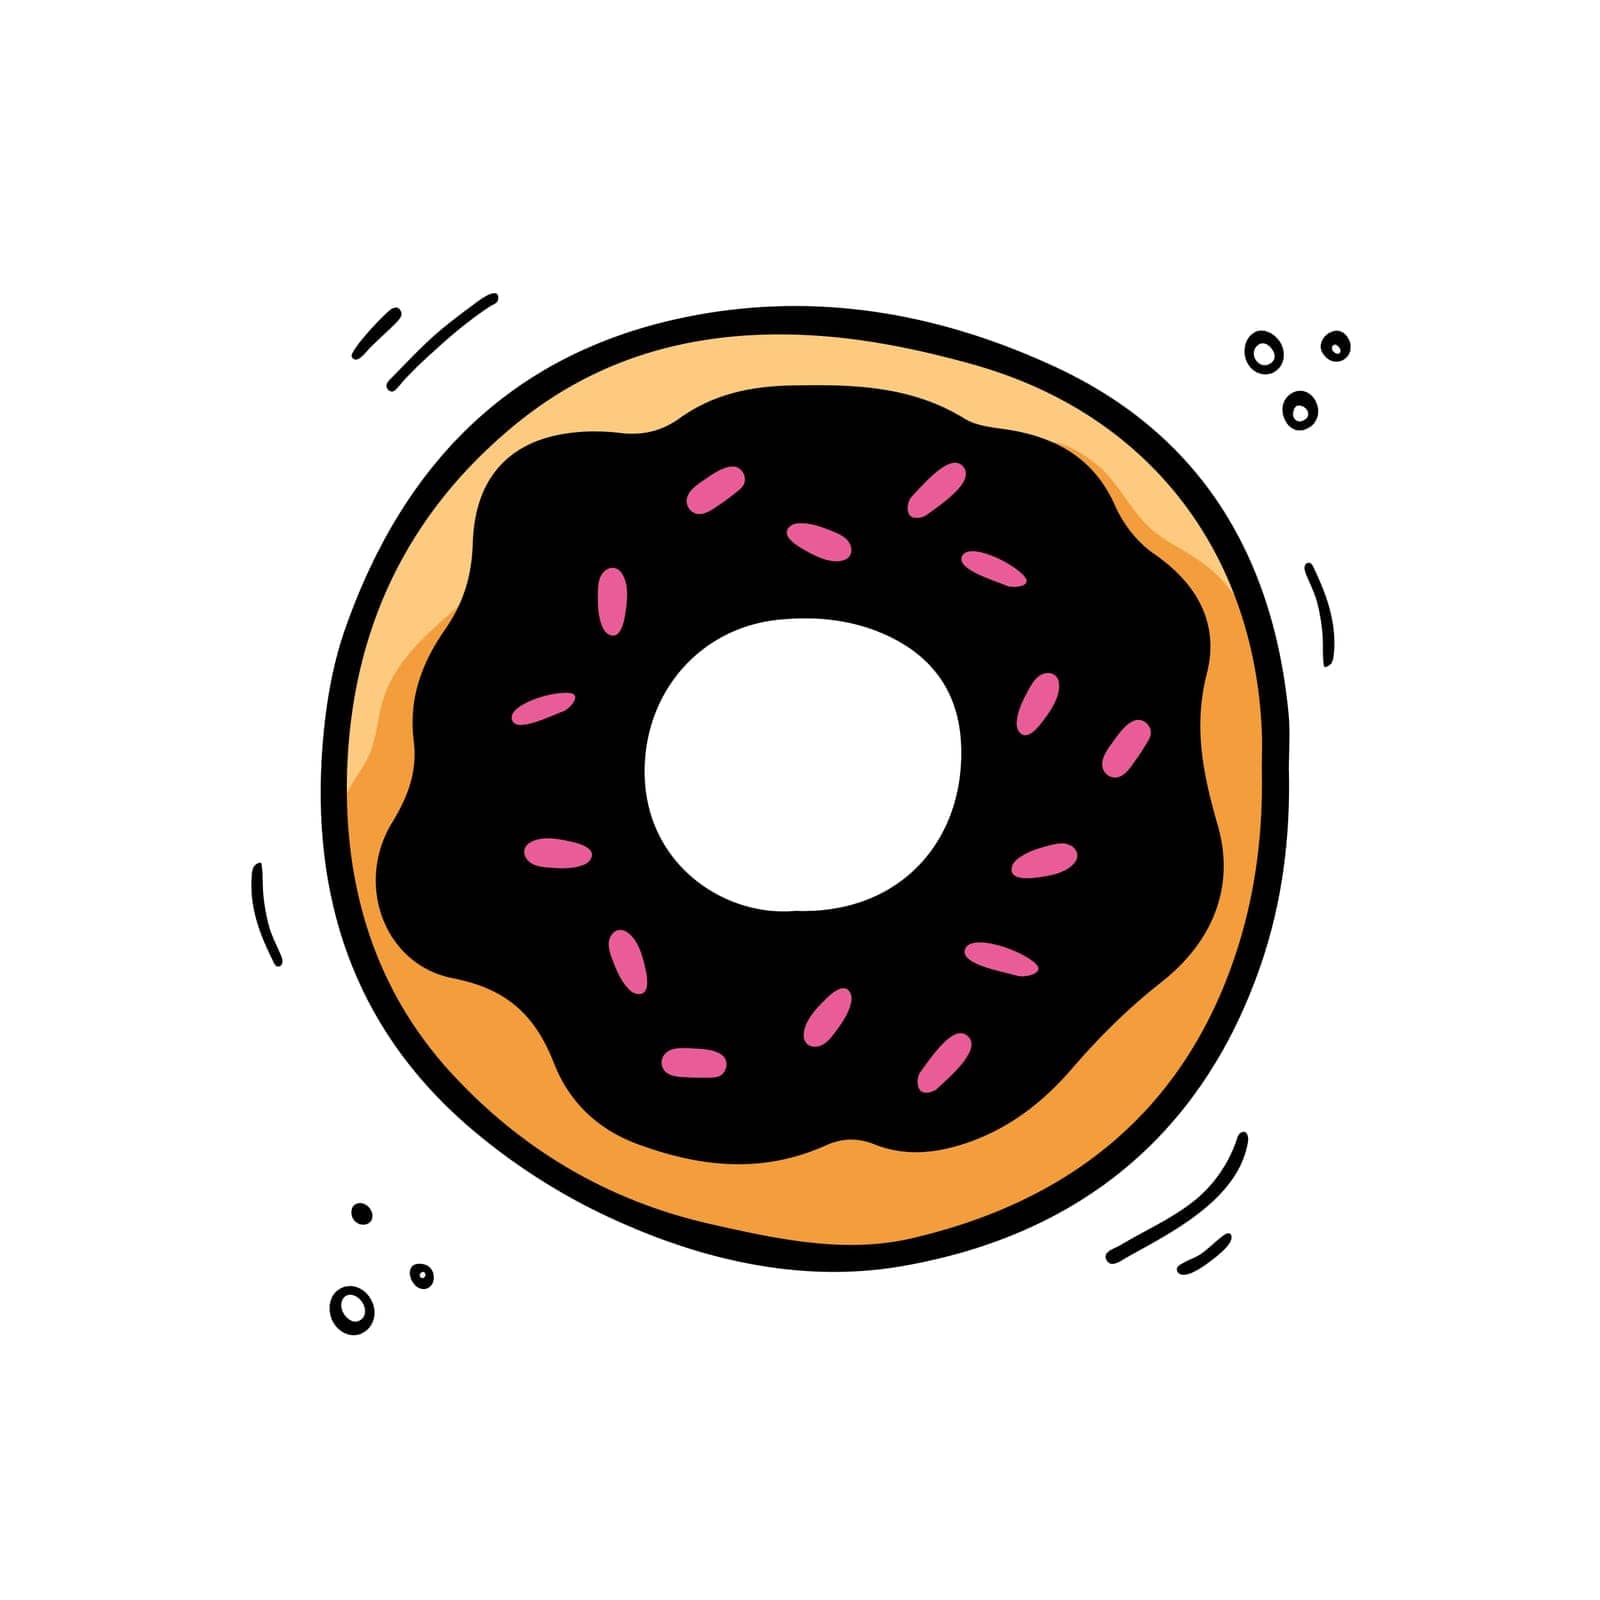 Donut illustration. Hand drawn Sketch of doughnut. Fast food illustration in doodle style. by KateArtery19